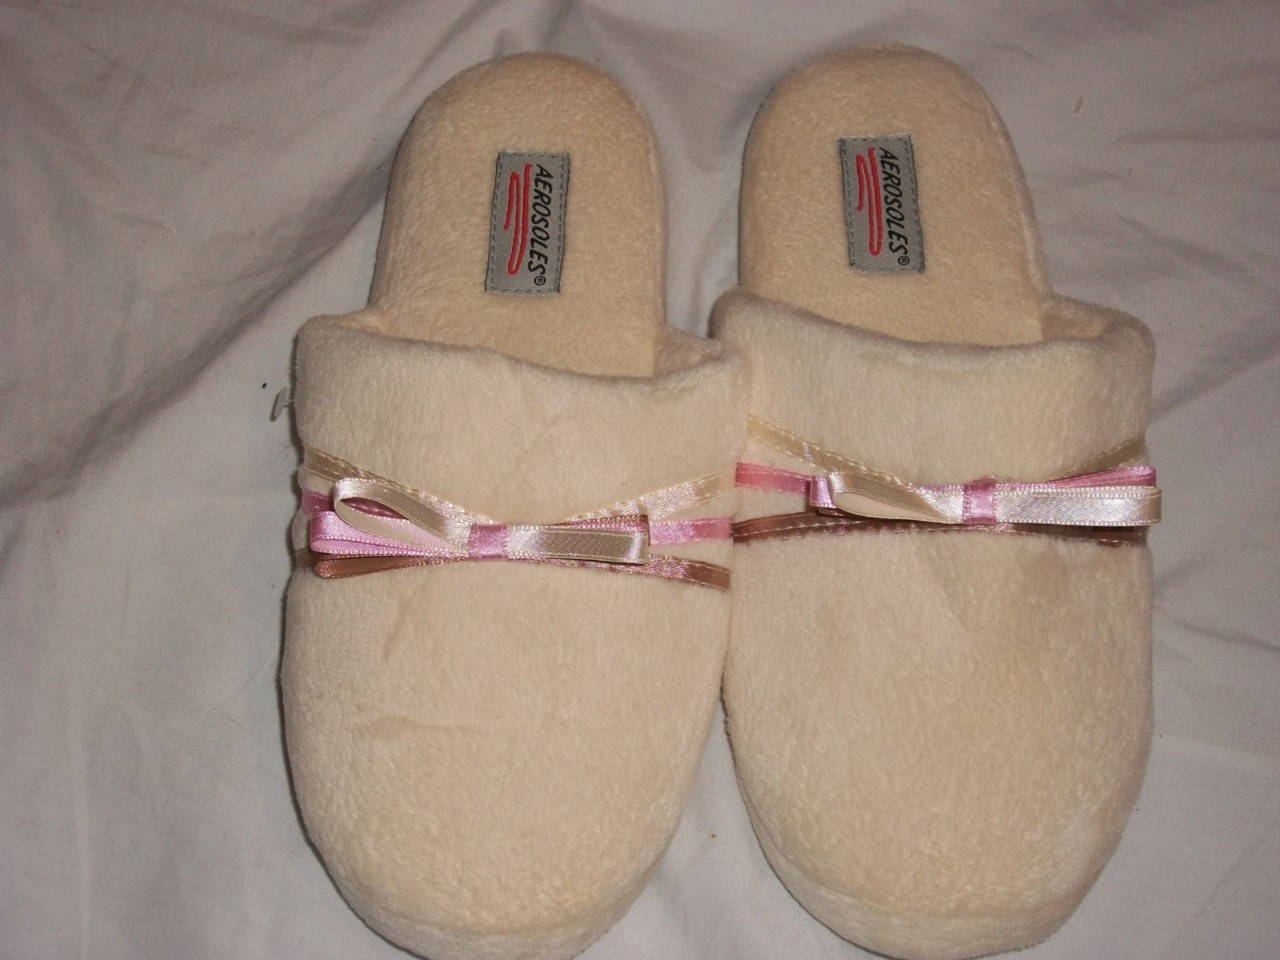 Bedroom Shoes For Womens
 NWT AEROSOLES WOMEN S BEDROOM SLIPPERS